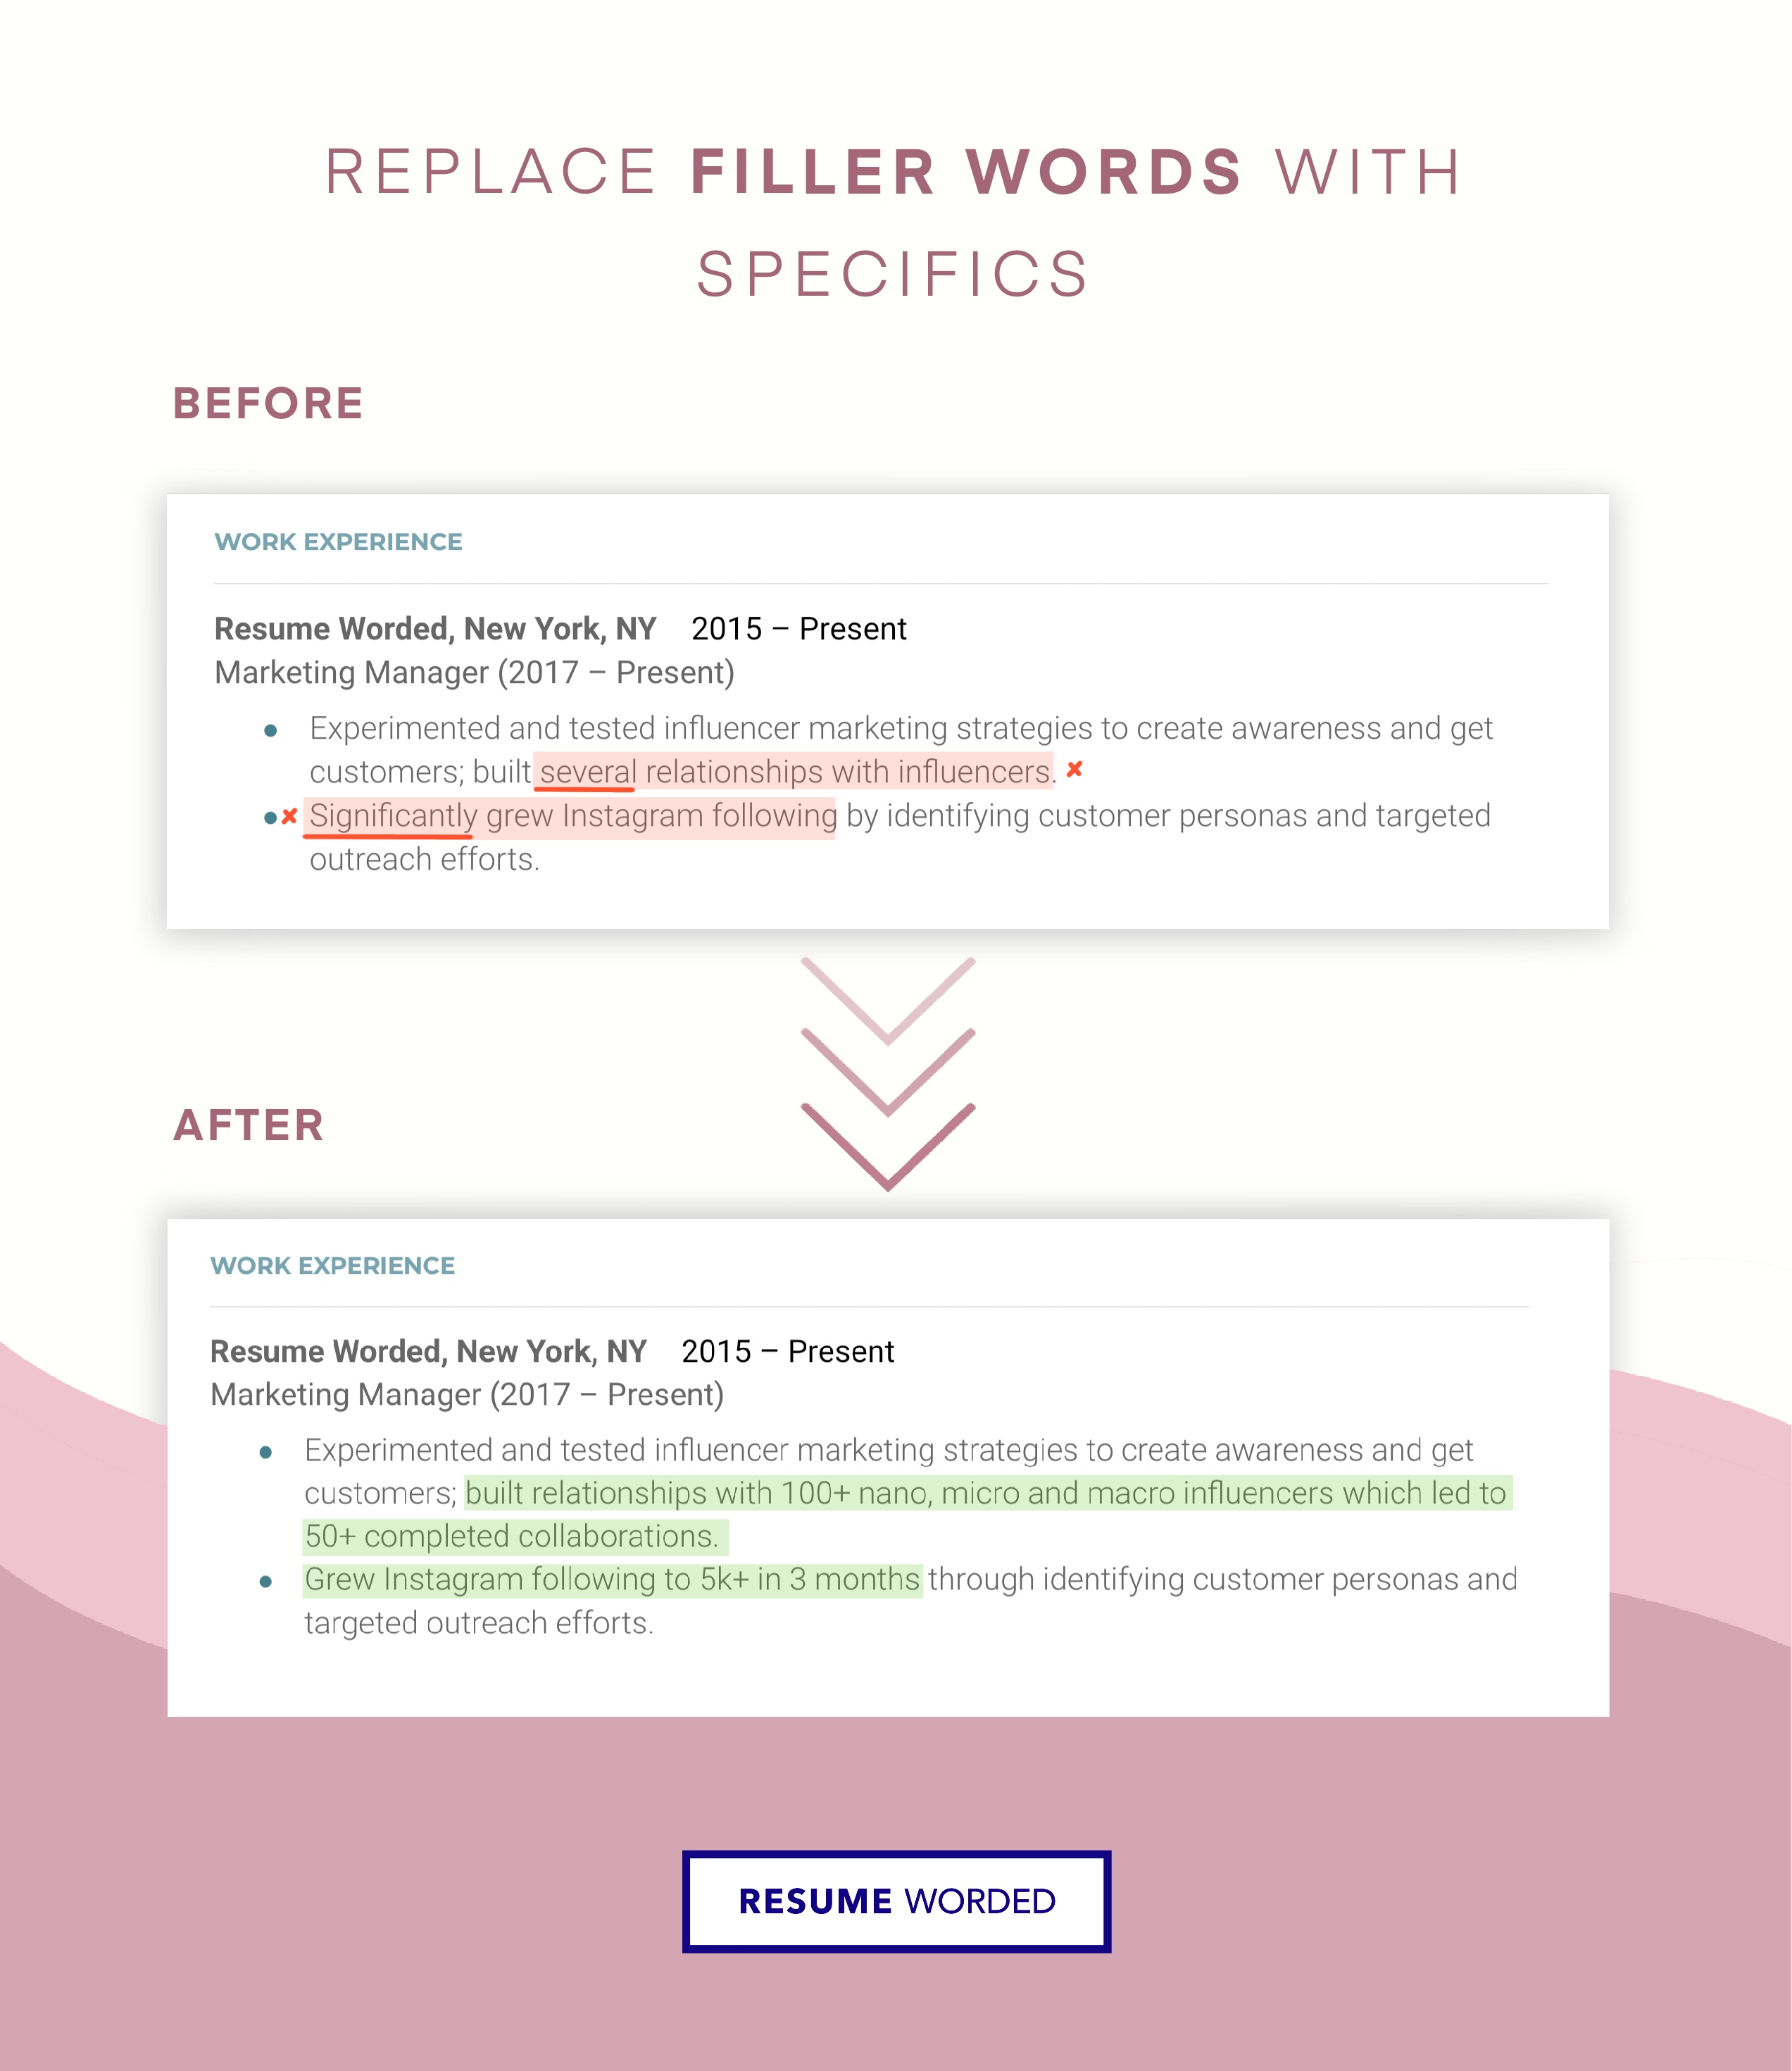 How to remove filler words from your resume